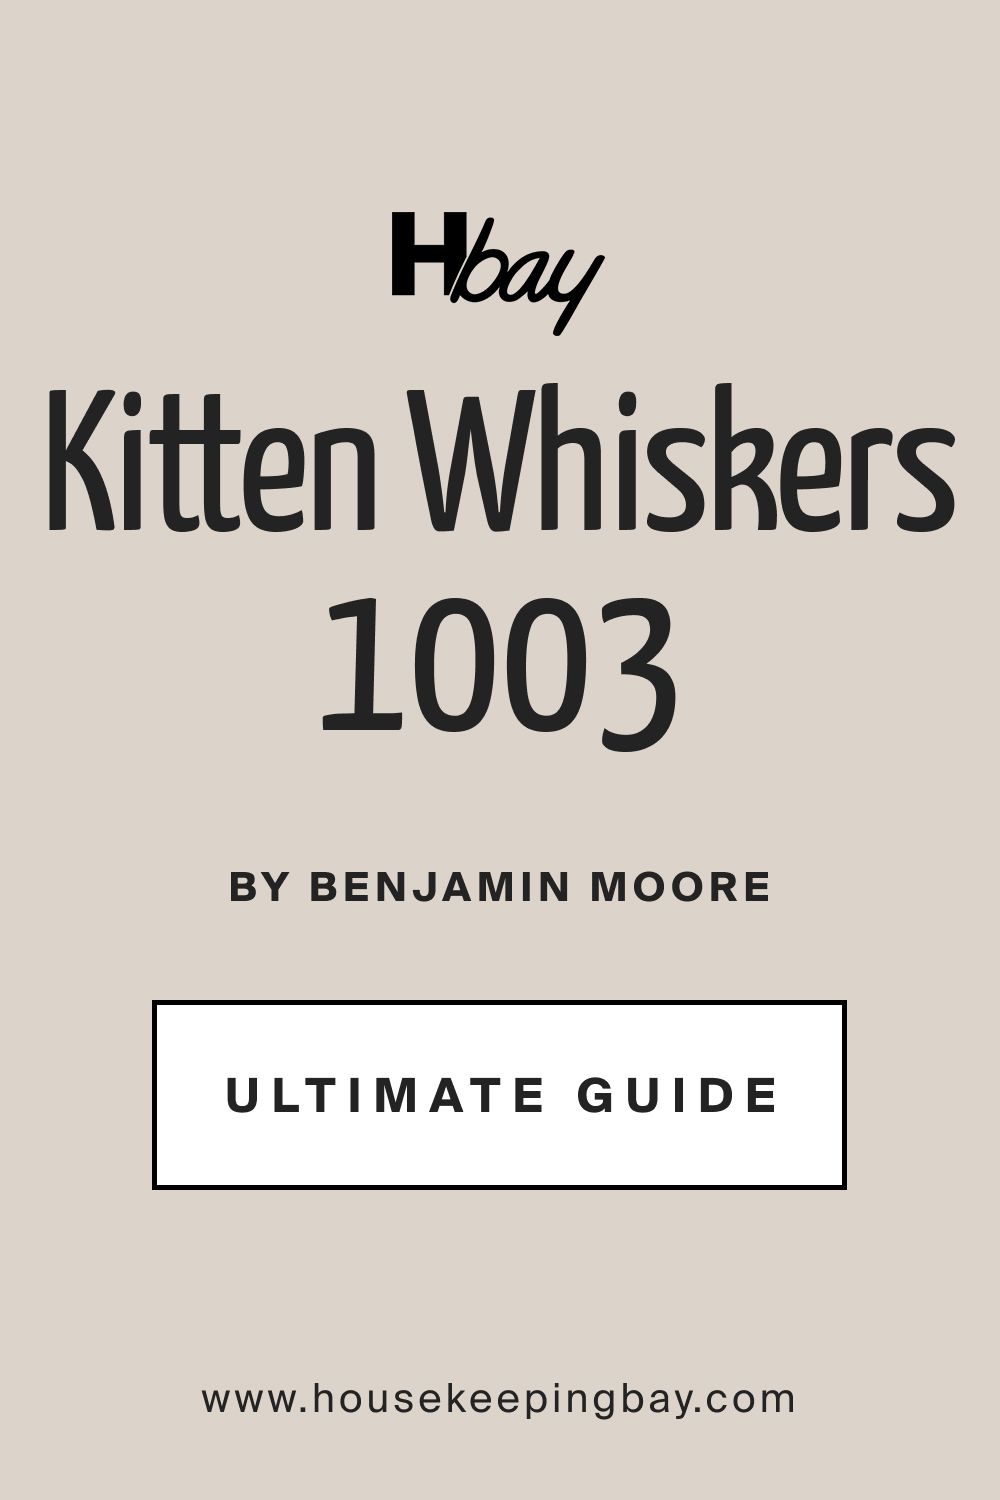 Kitten Whiskers 1003 Paint Color by Benjamin Moore